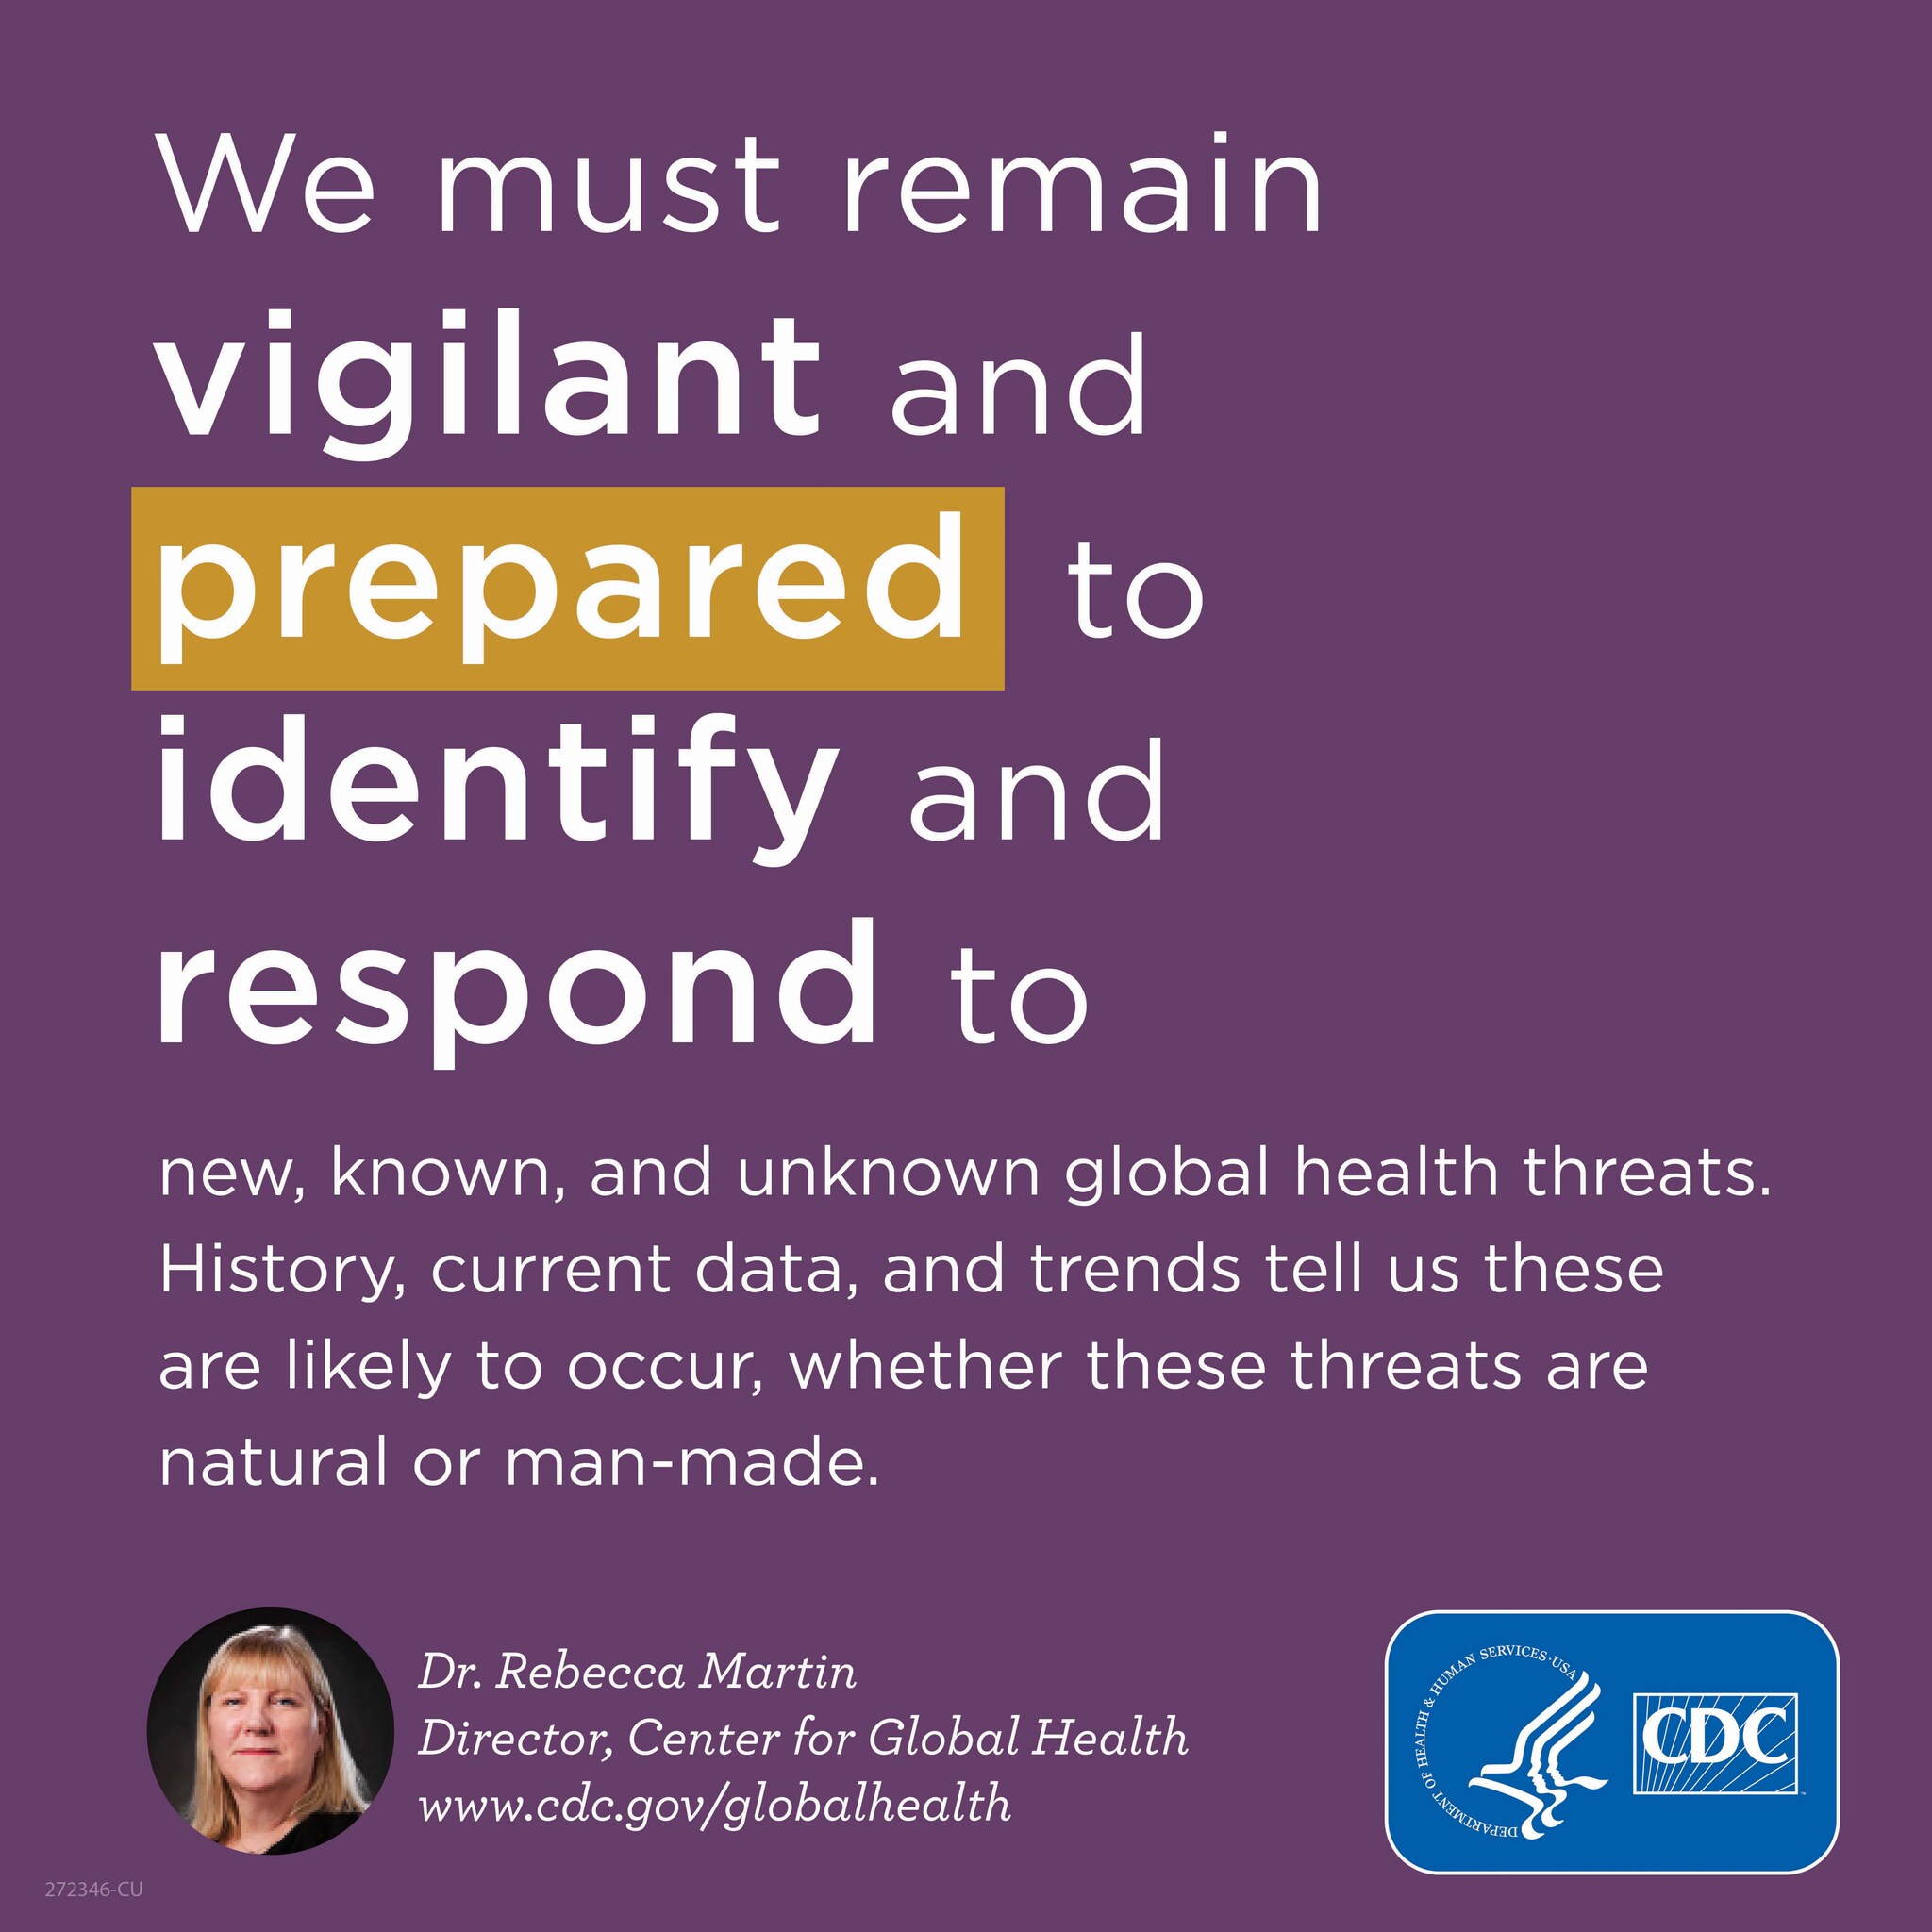 We must remain vigilant and prepared to identify and respond to new, known, and unknown global health threats.